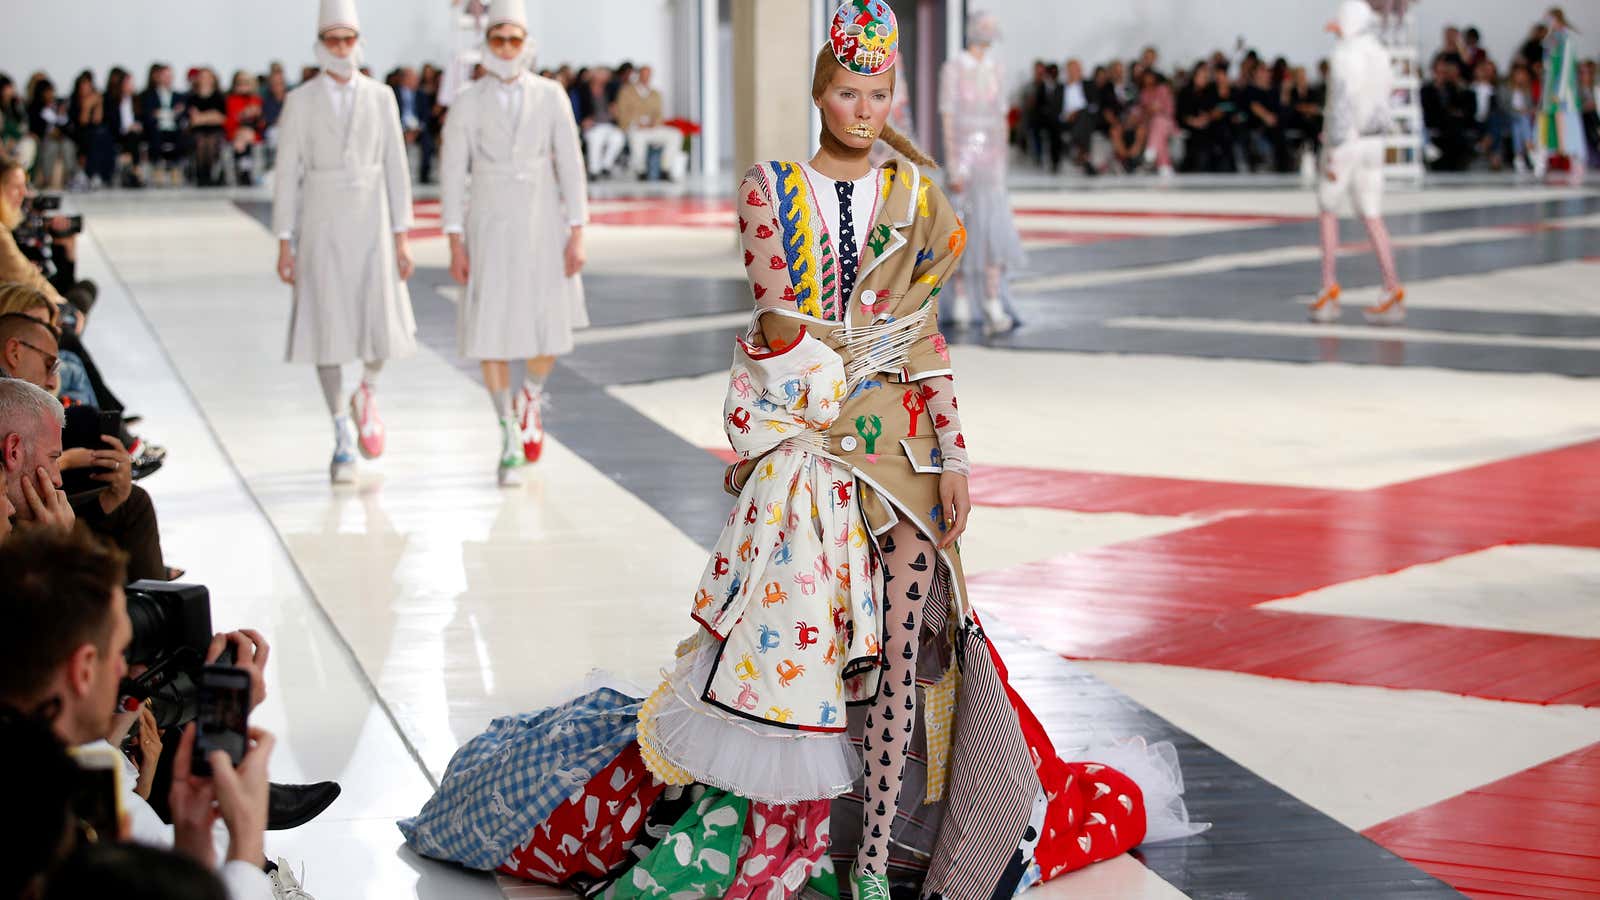 Thom Browne sent out models fully bound in 5-inch heels. Cool!